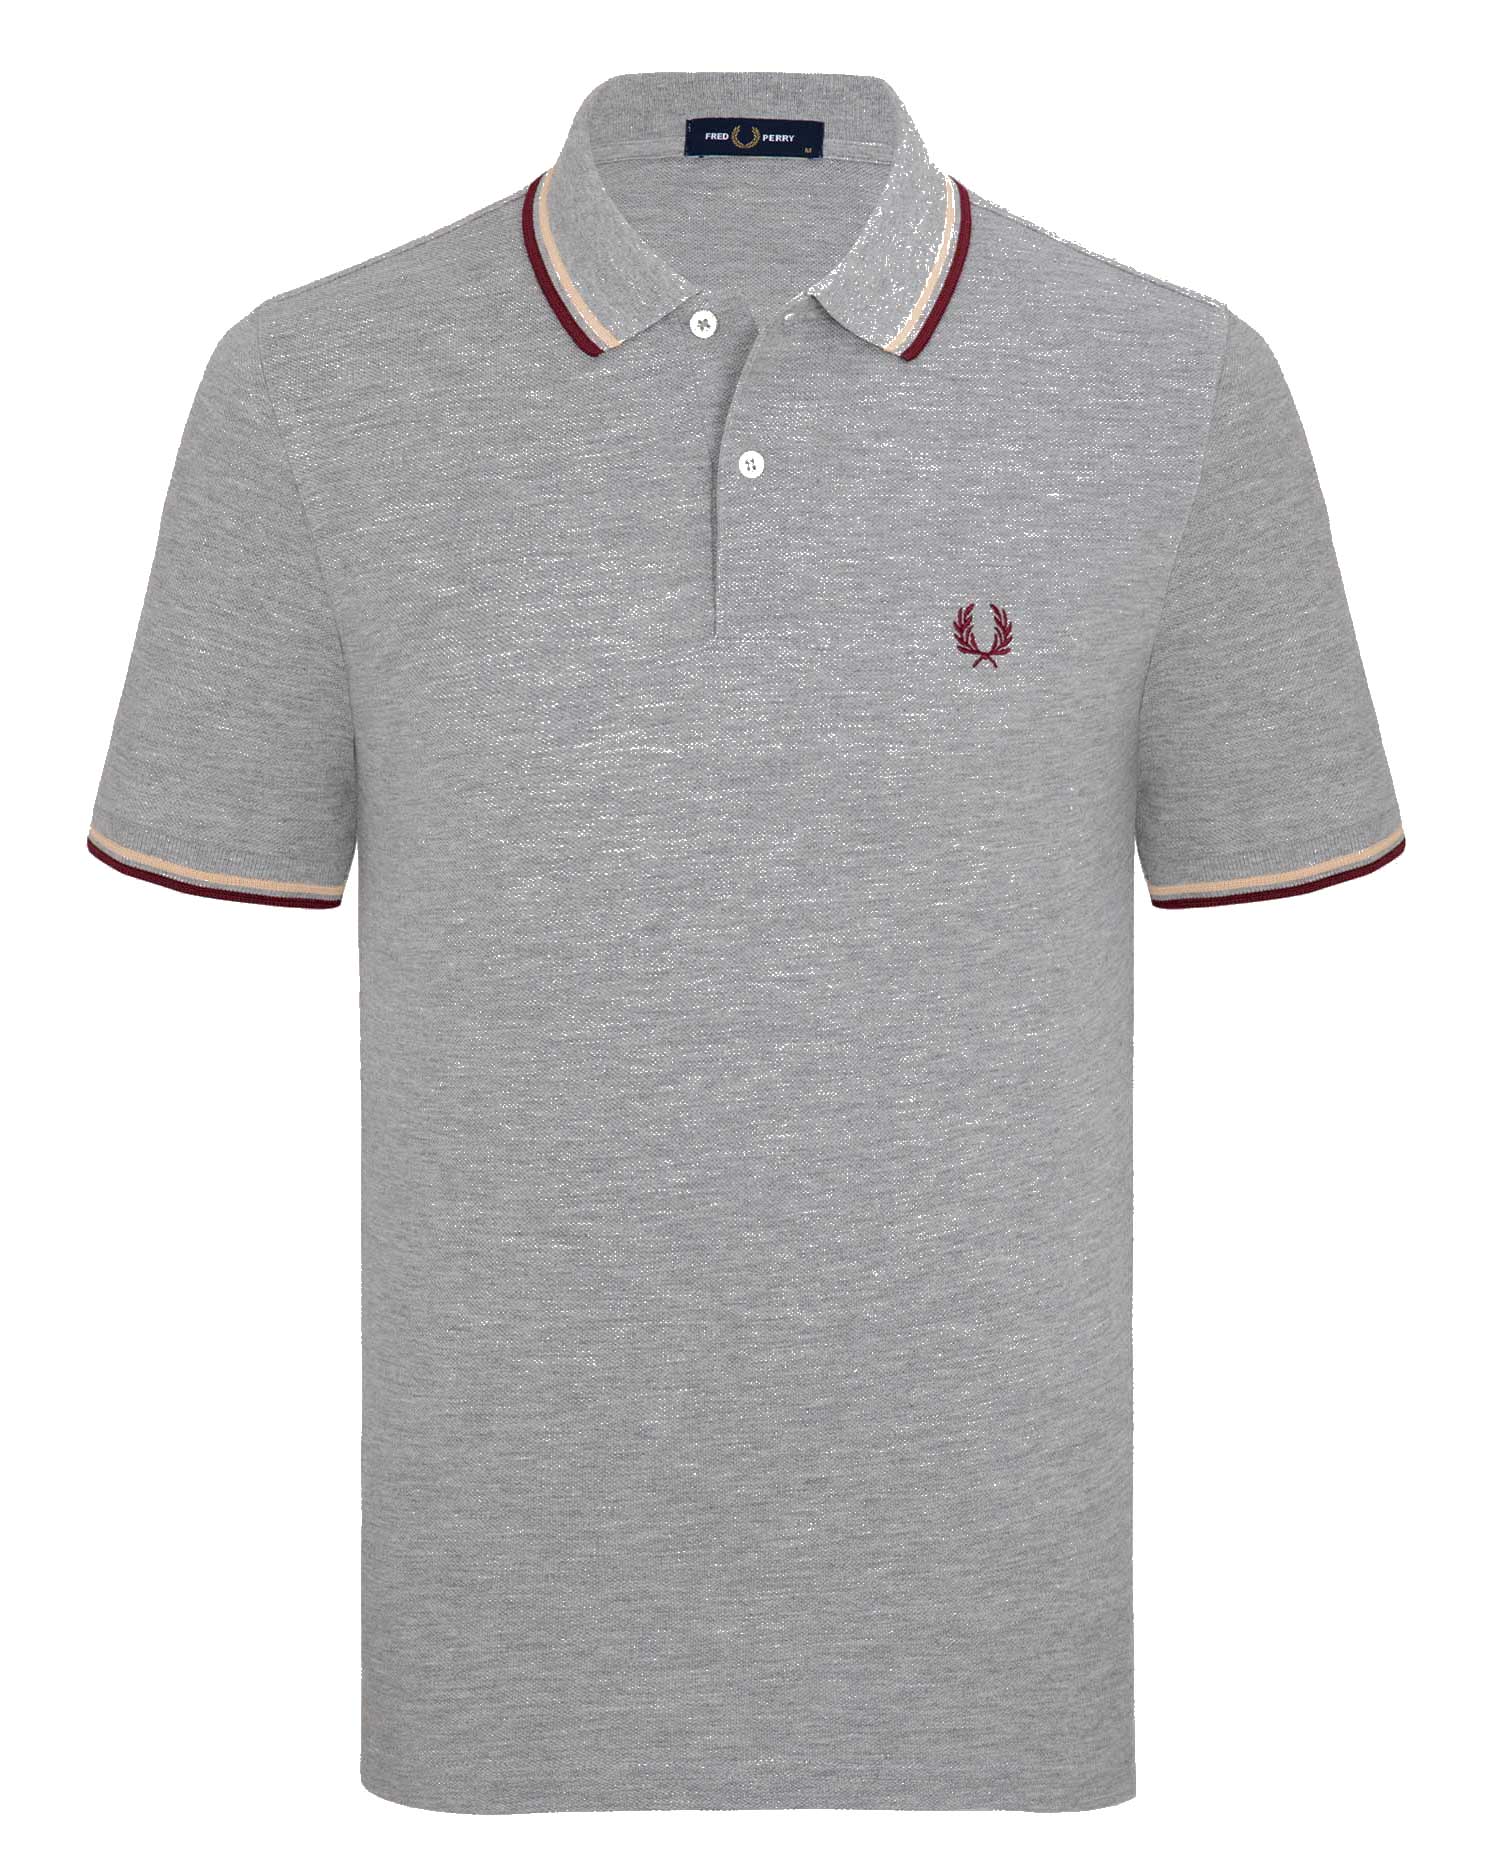 POLO FRED PERRY - GRIS/BORDEAUX